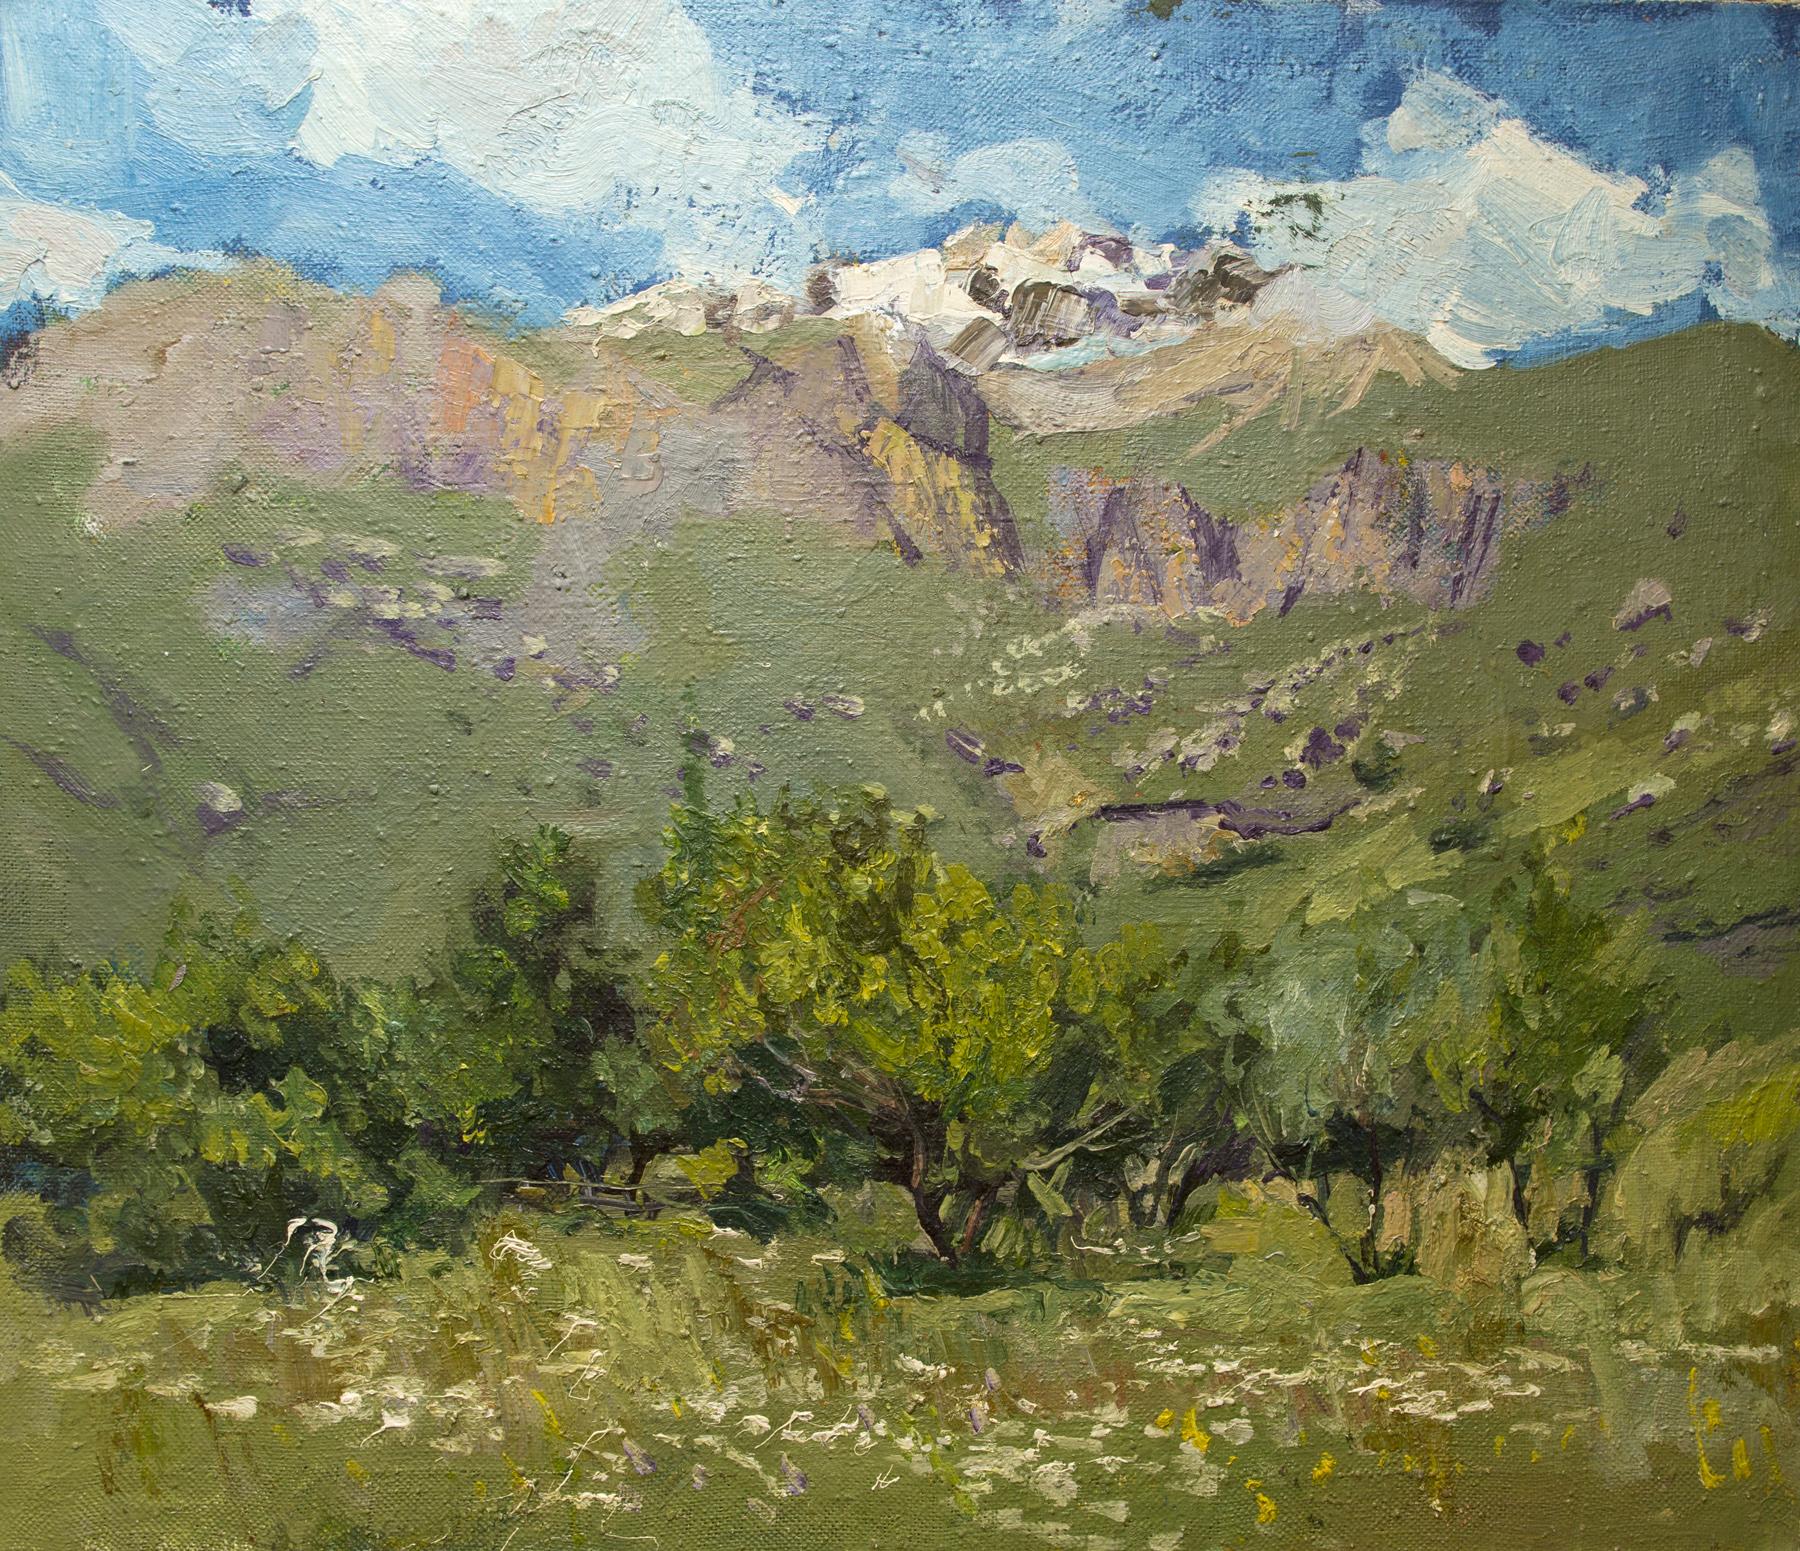 Apple orchard in the mountains. Original modern art painting